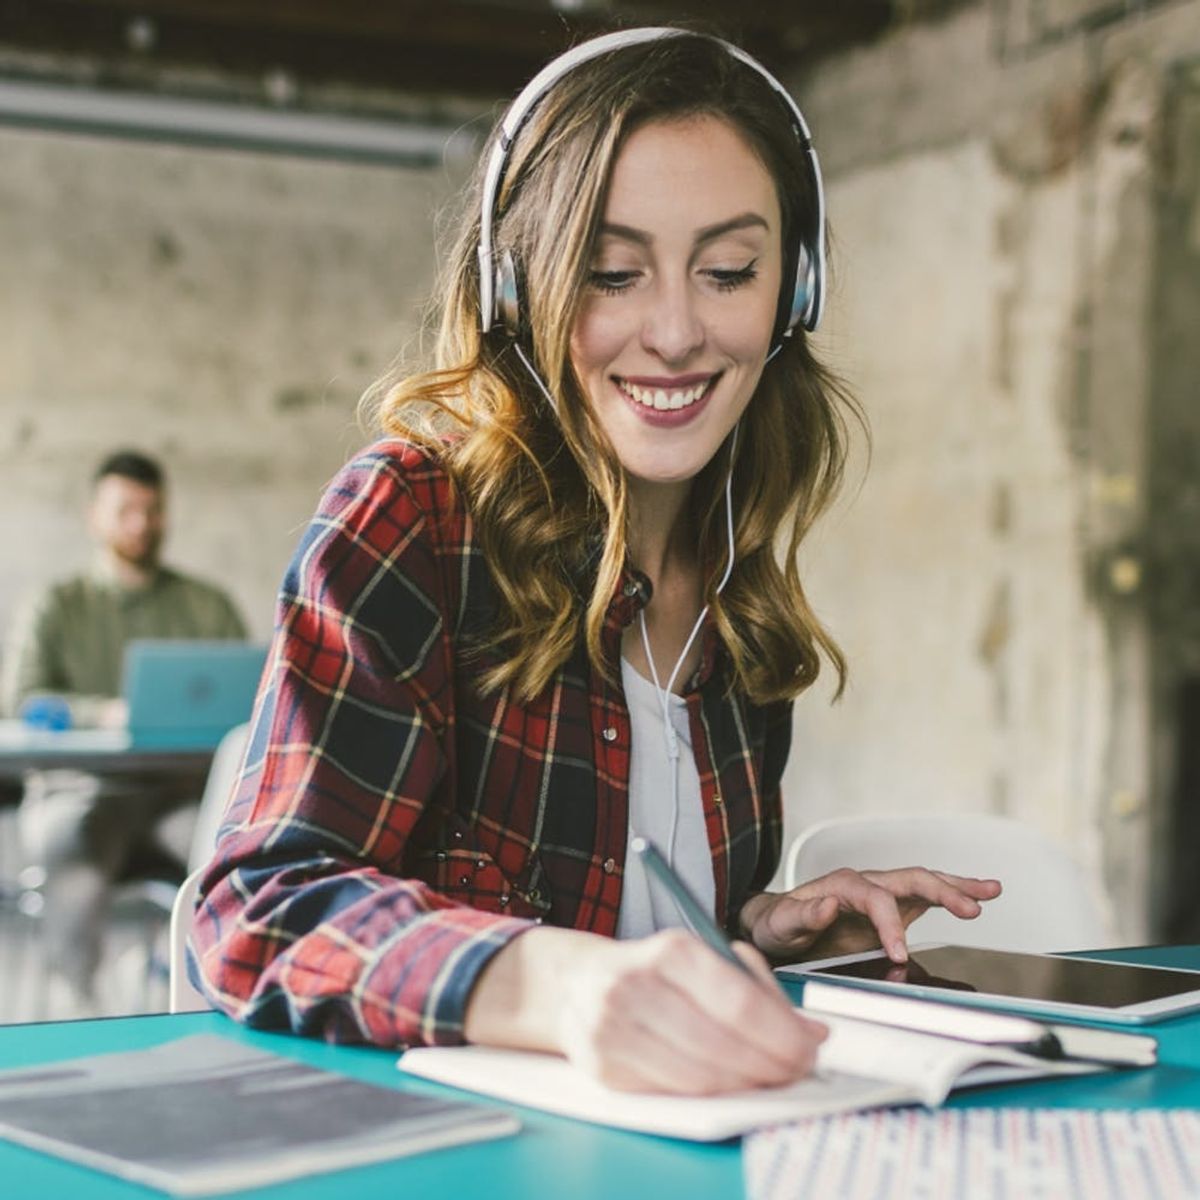 6 Ways to Use Music to Increase Your Productivity